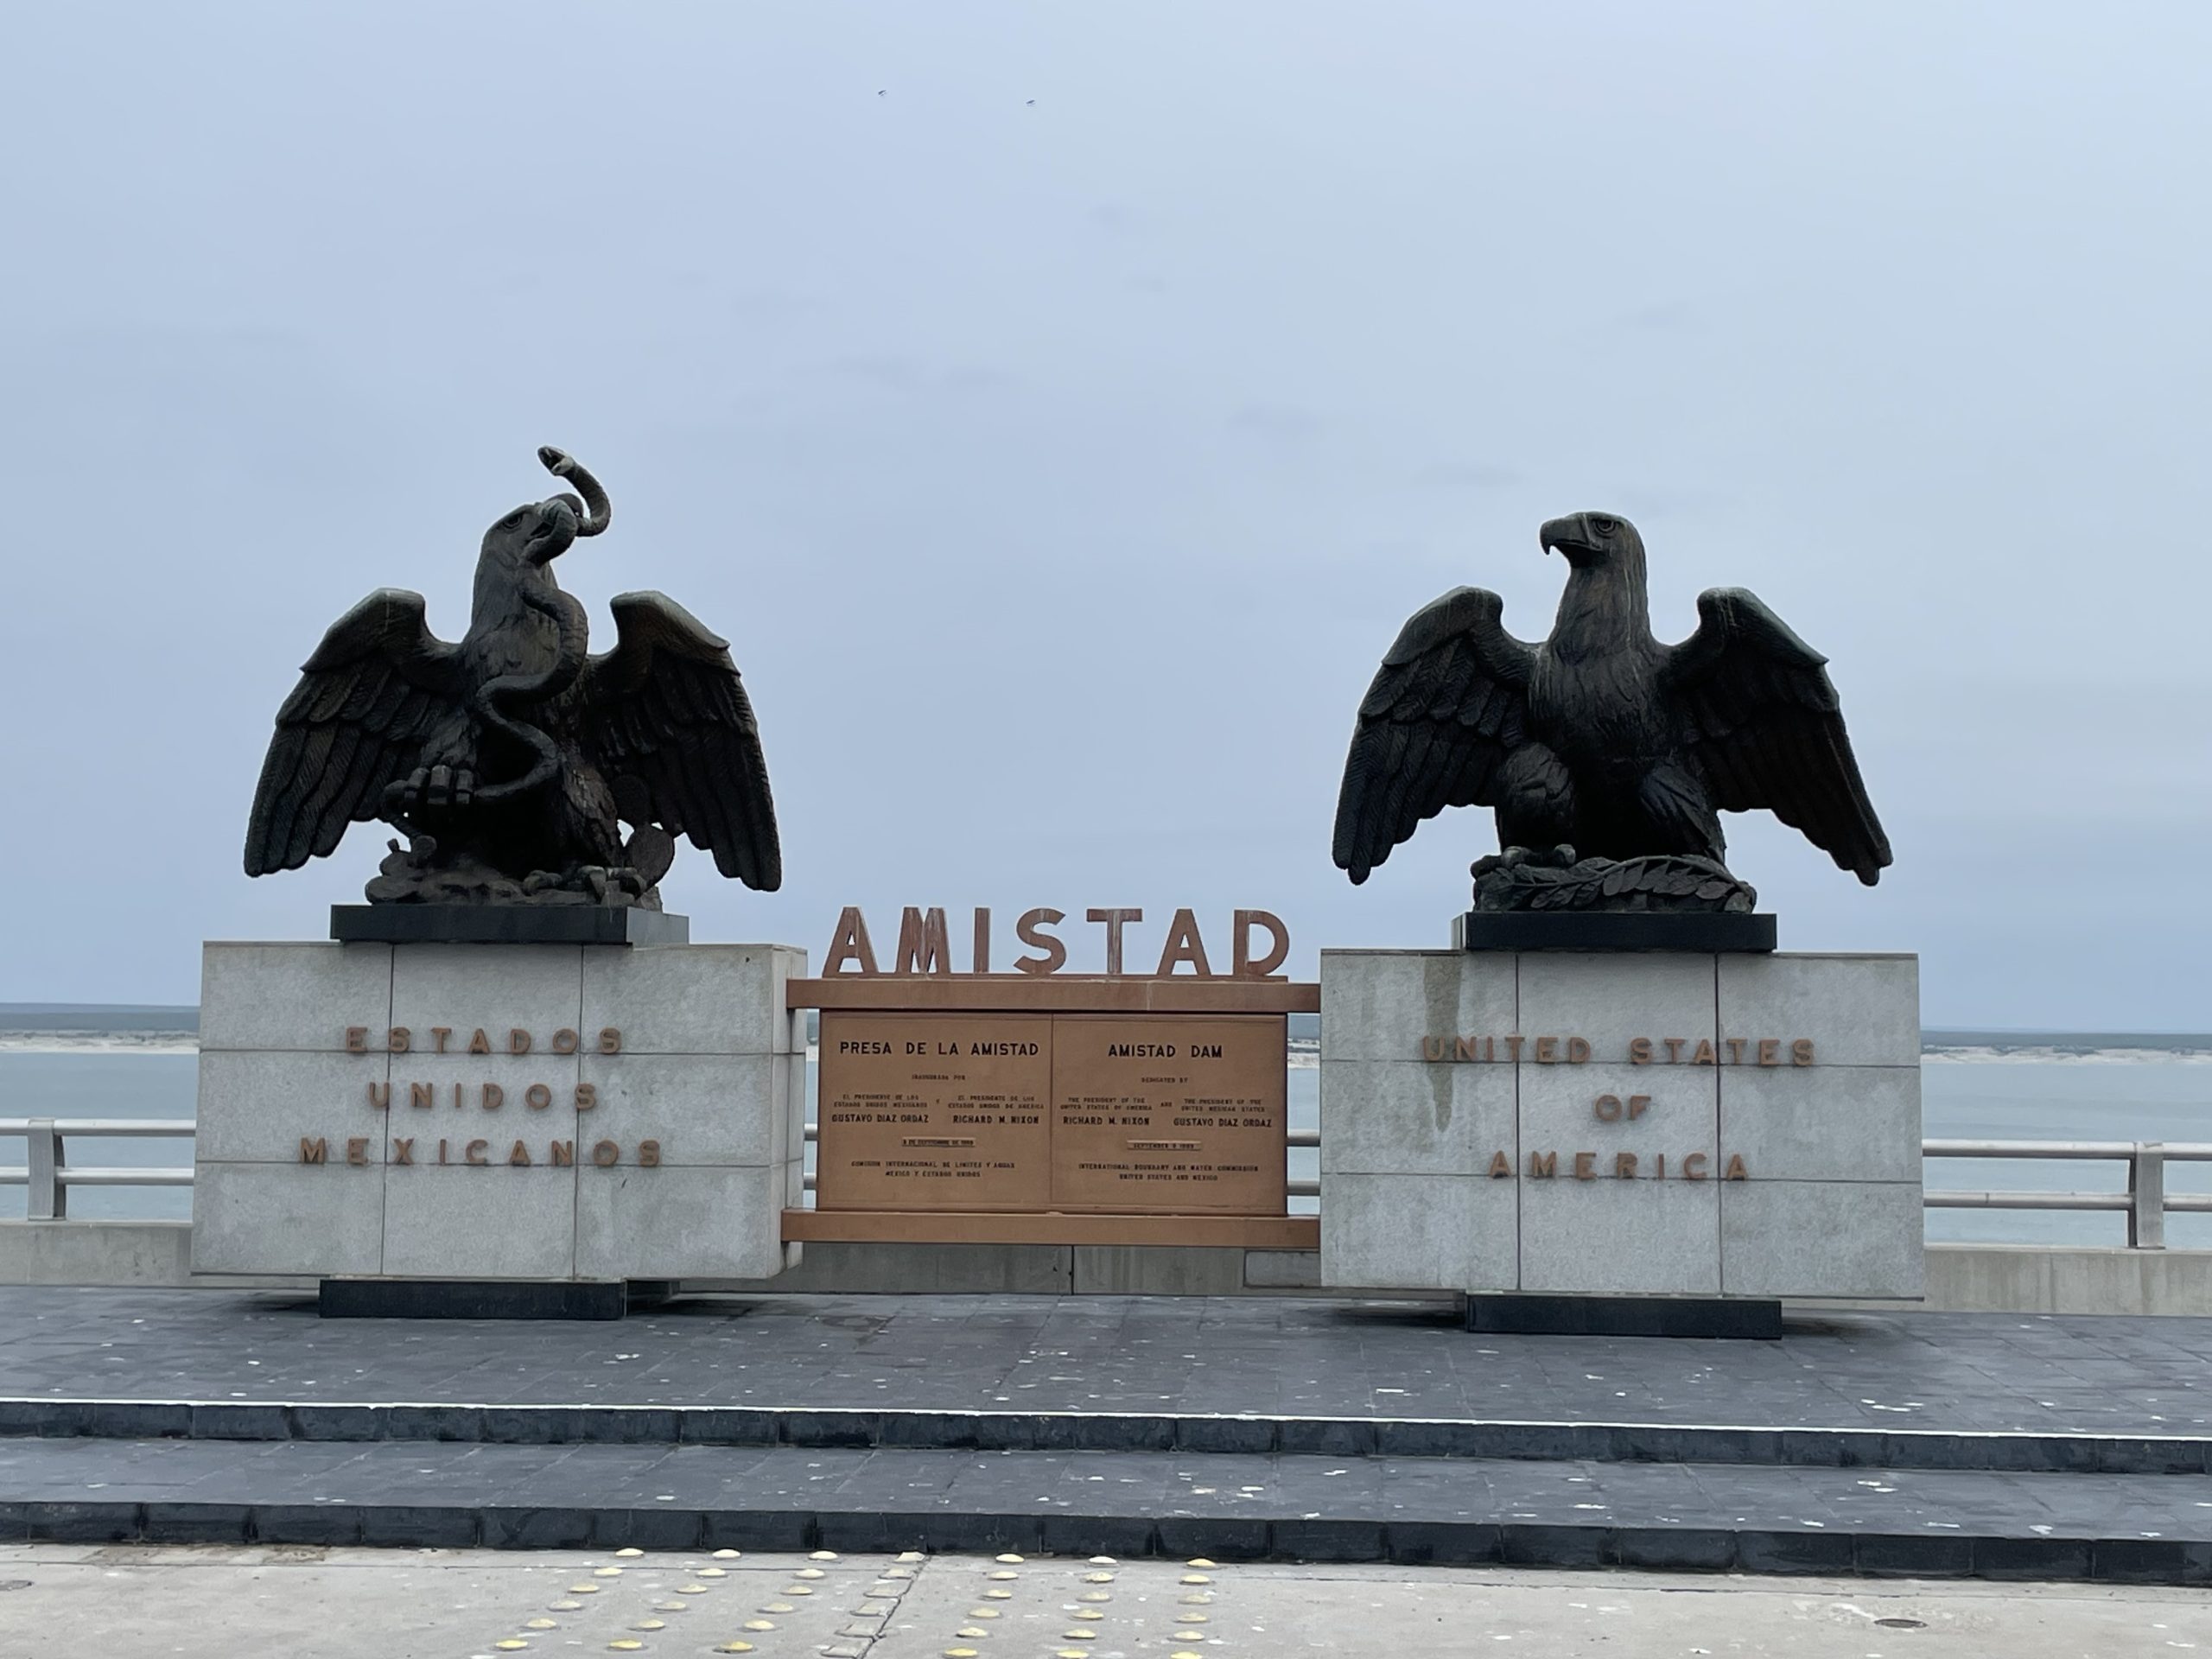 Statues and plaque at the International Boundary Line on Amistad Dam - dedicated on September 8, 1969